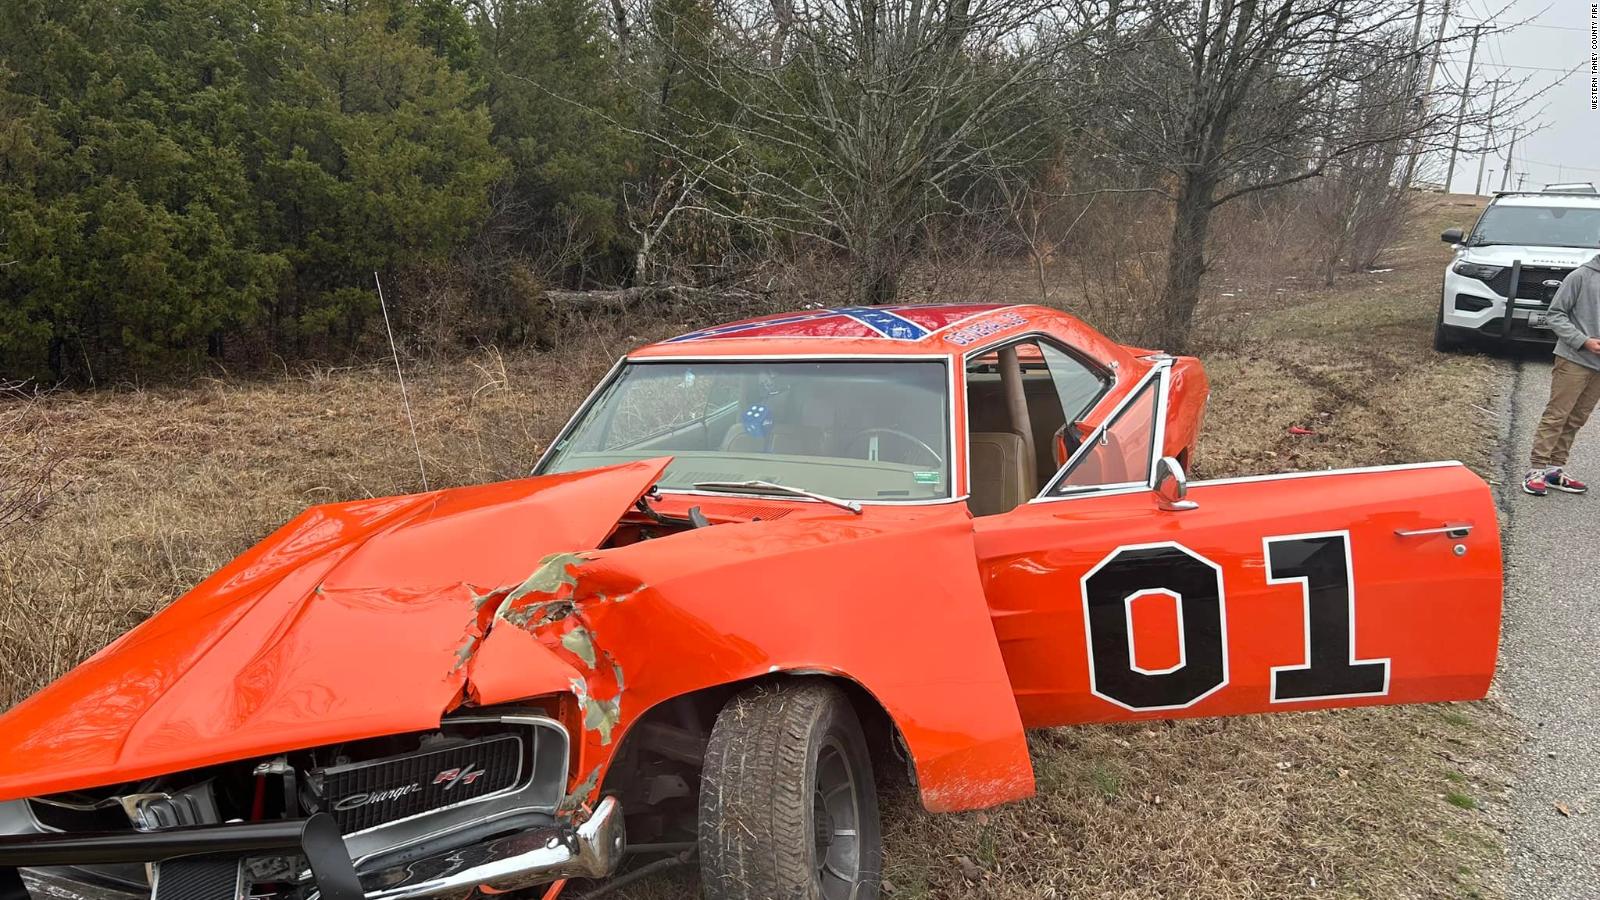 Iconic Car From The Dukes Of Hazzard Show Wrecked On Missouri Highway 